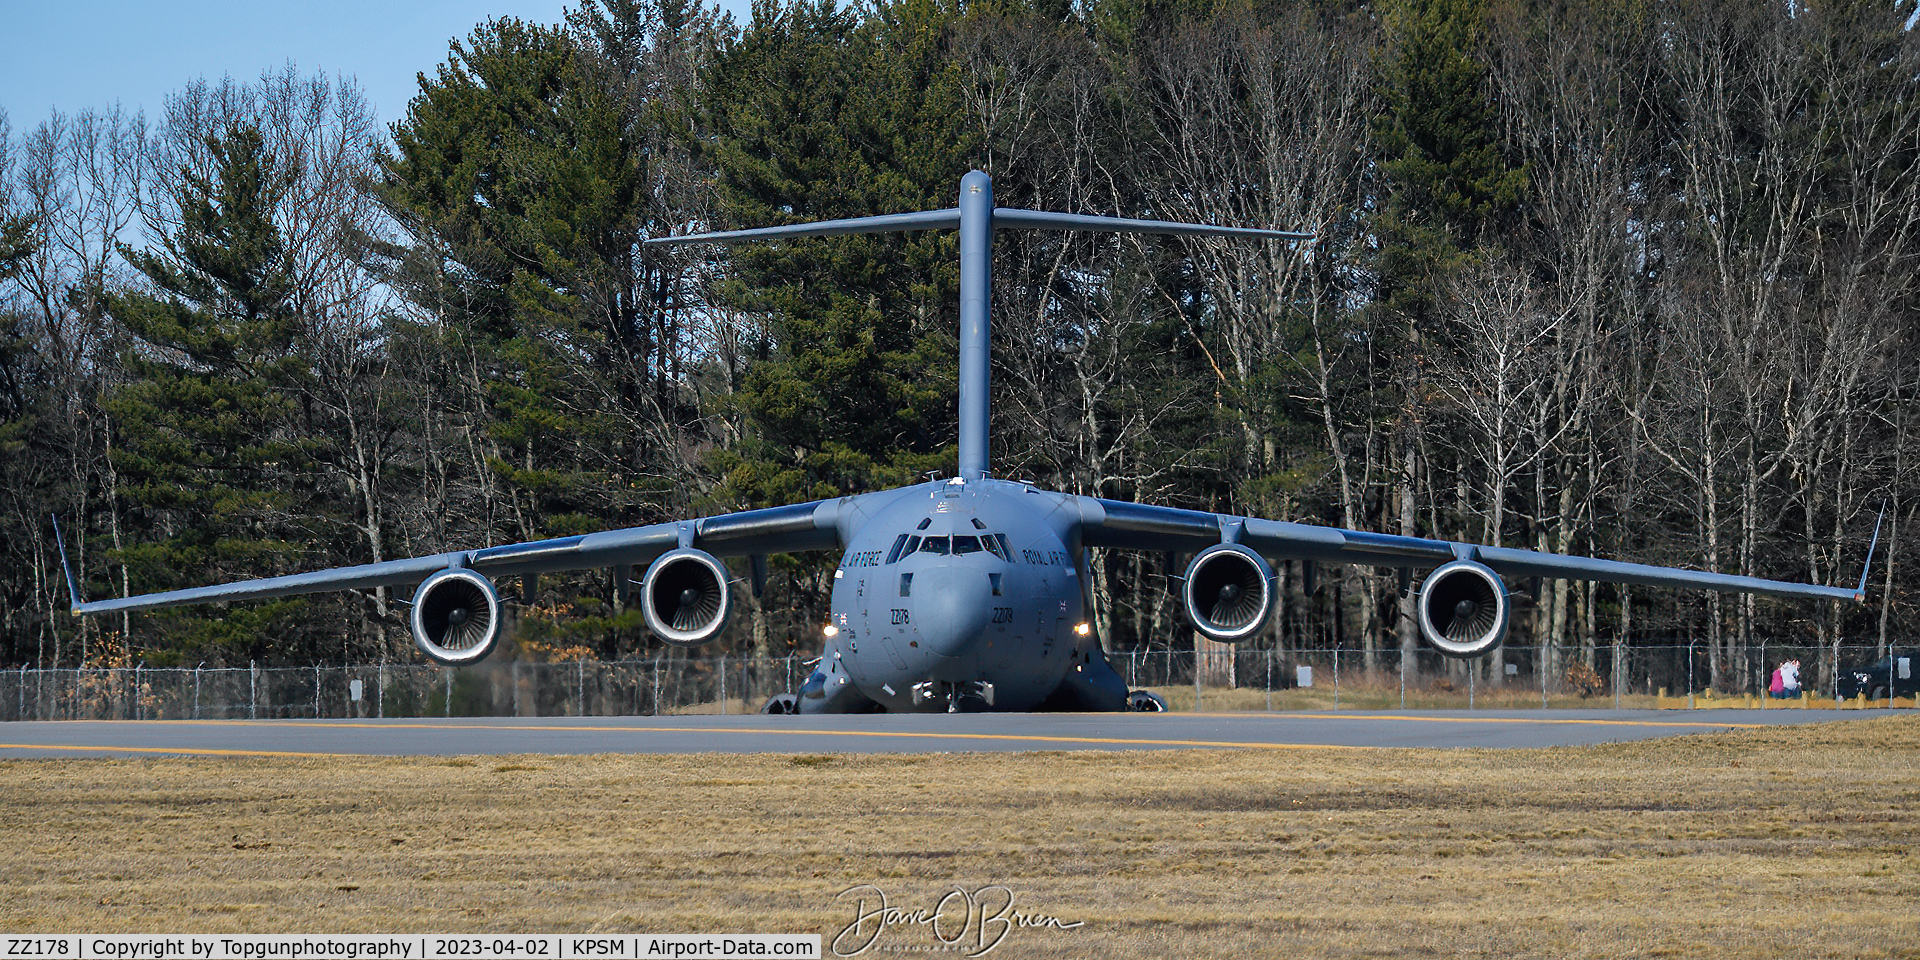 ZZ178, 2012 Boeing C-17A Globemaster III C/N F-245, ASCOT6650 holding short waiting for IFR release